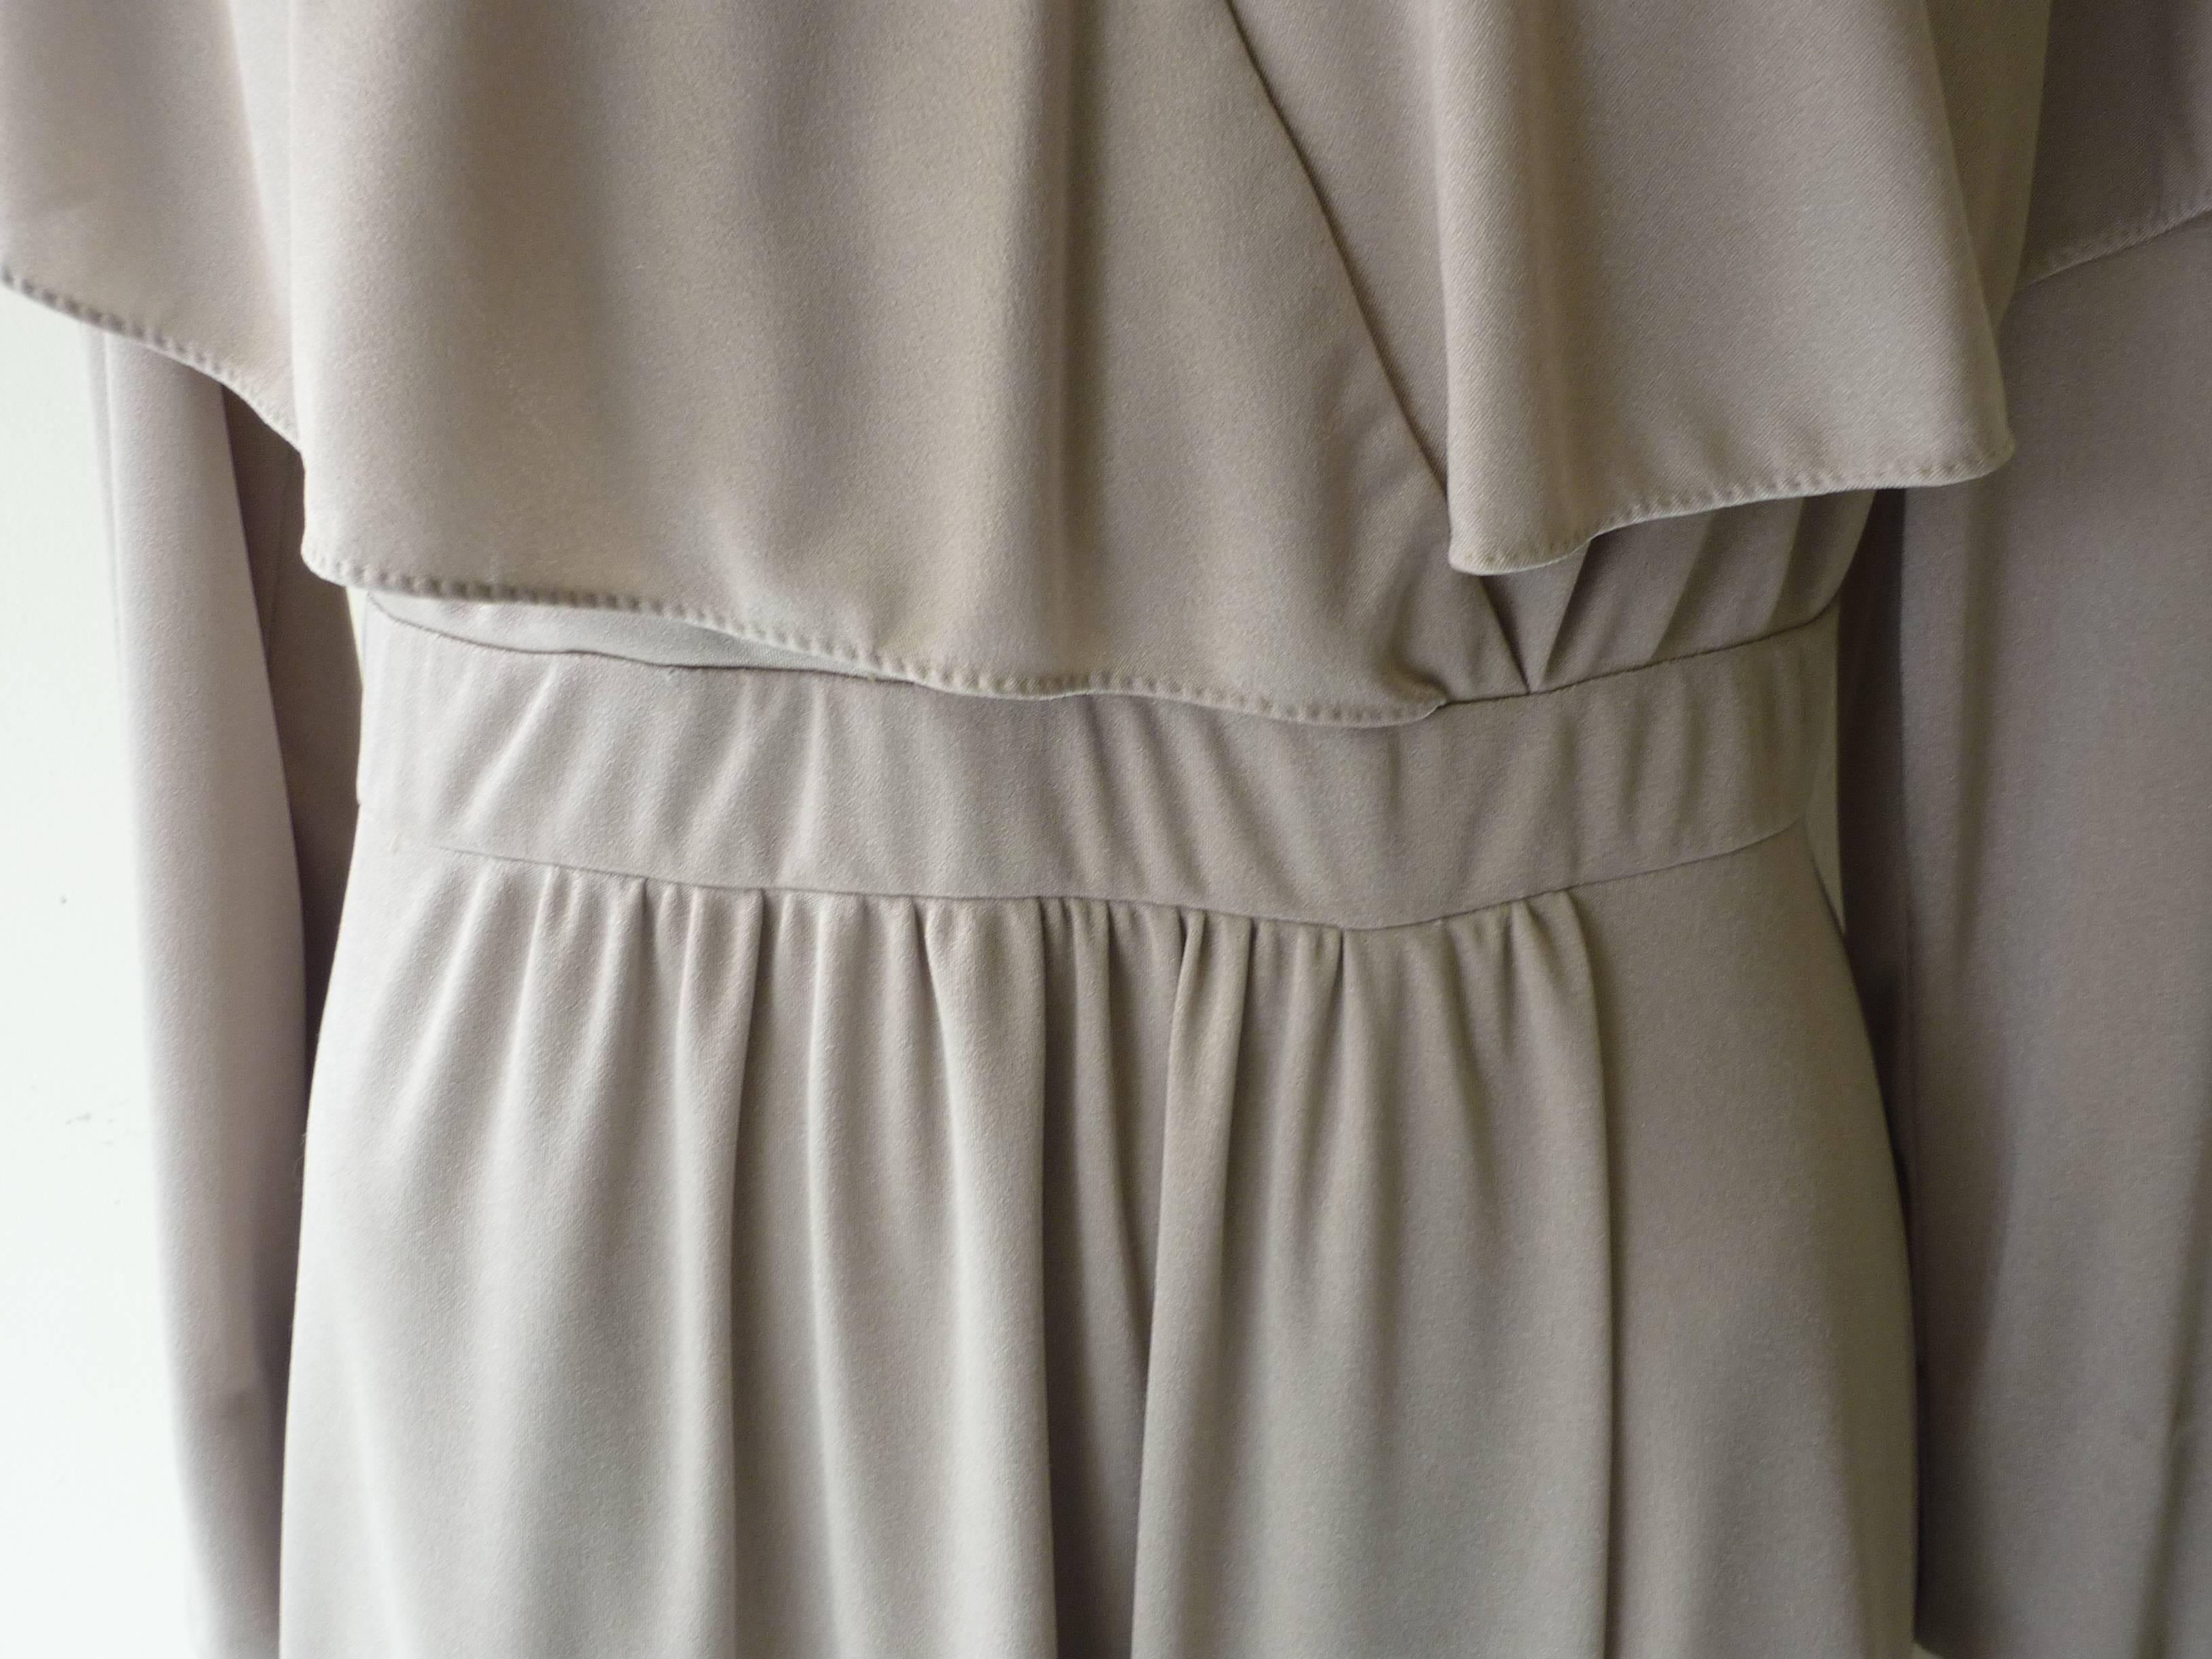 Simple and well cut half wrap dress in shiny beige tones, with a v-neck and a cape overlay. The long sleeves have eight covered buttons each, and there is a built in waist band.

The dress has hand finished elements and a zip closure to the